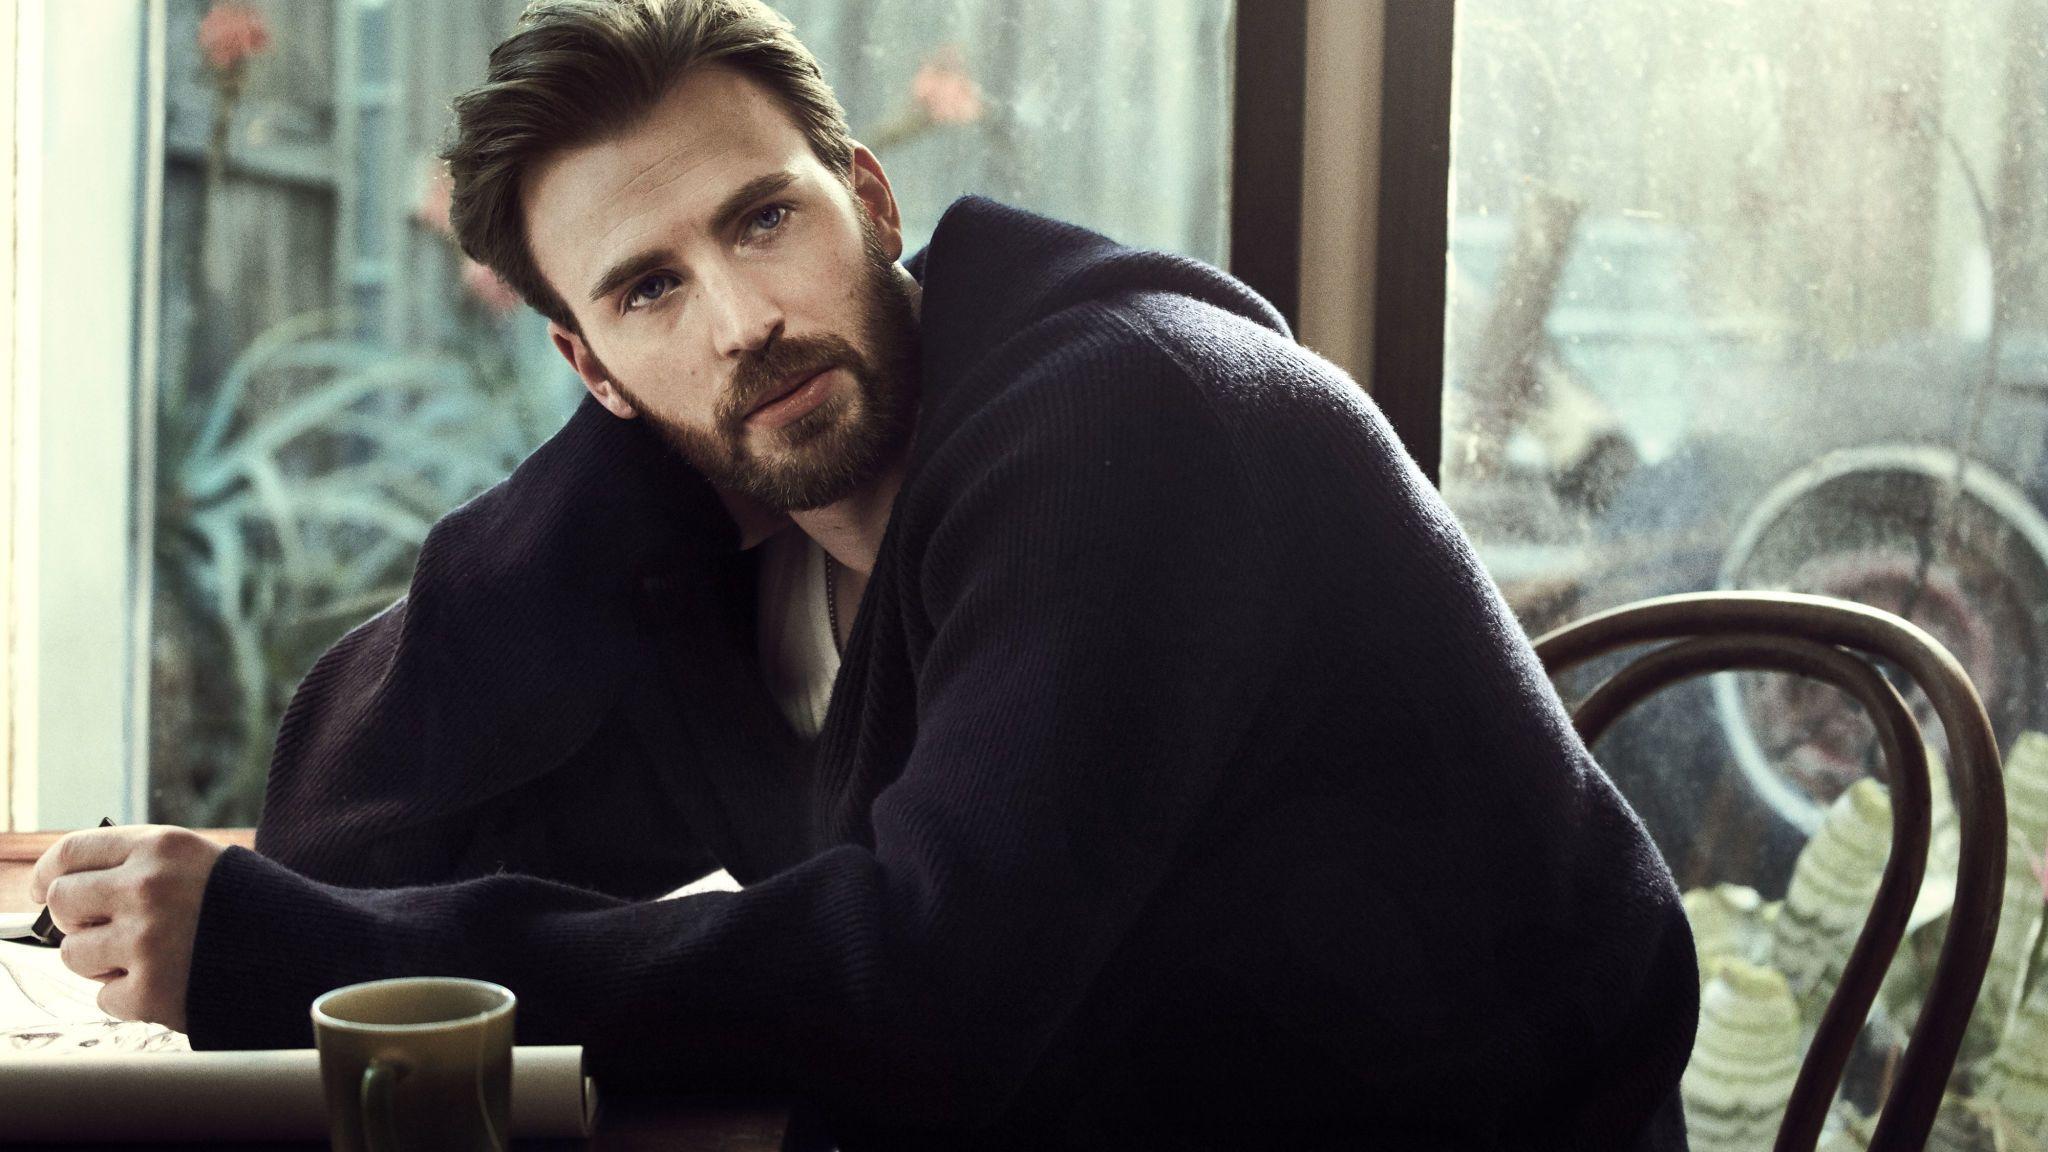 Photos Chris Evans' new interview and photo session for Esquire